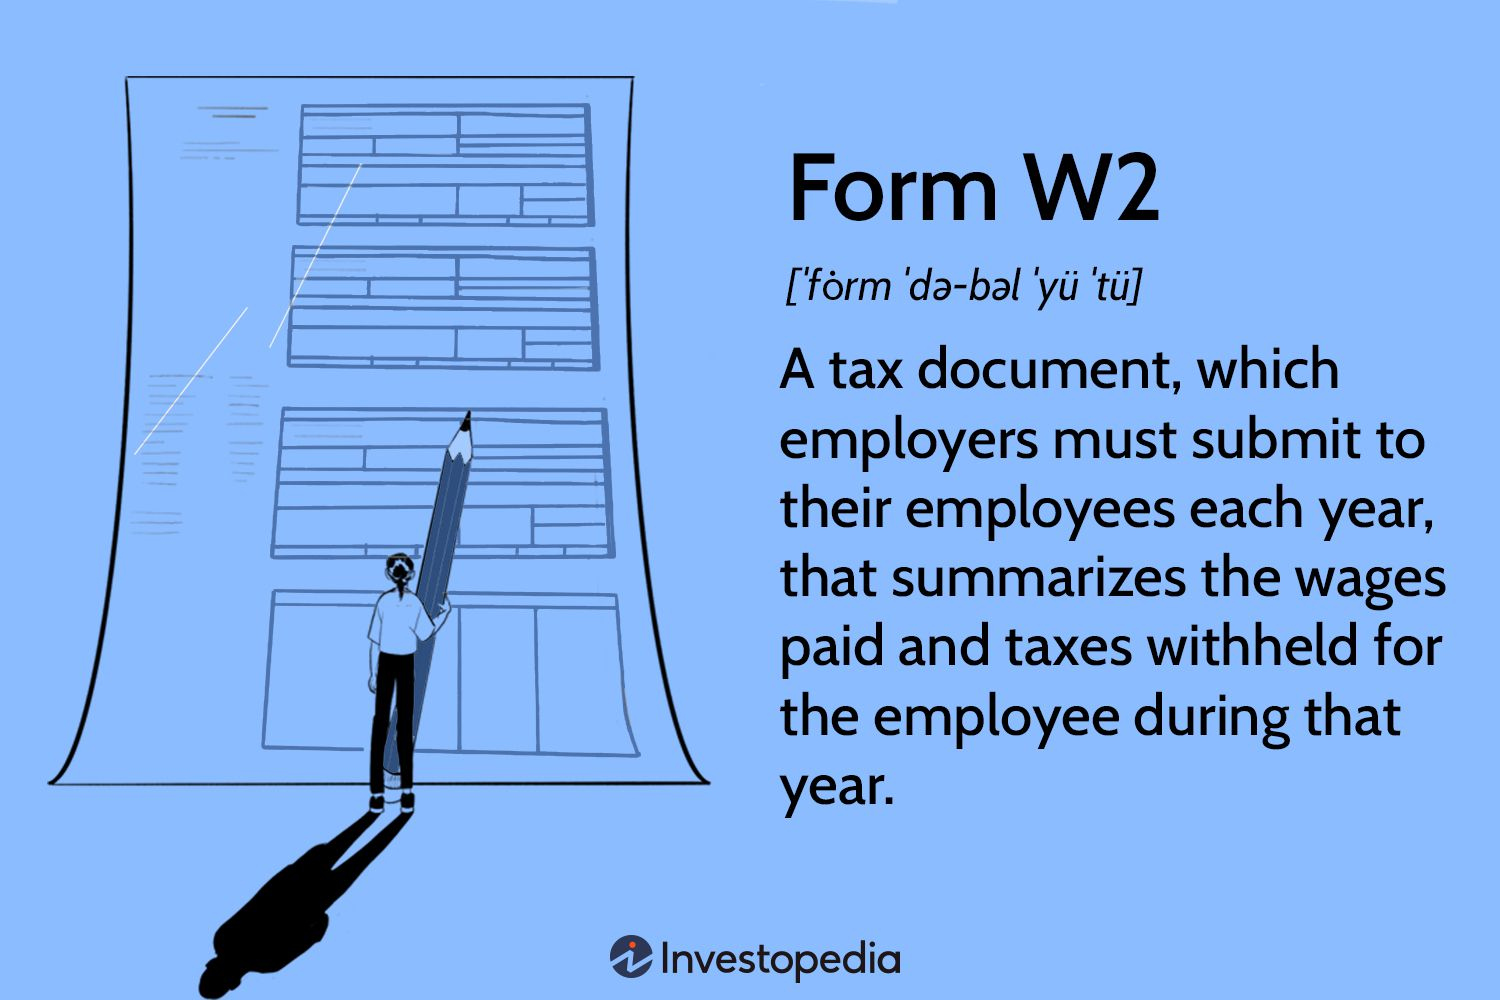 Form W-2 Wage And Tax Statement: What It Is And How To Read It within When Do W2 Forms Come Out